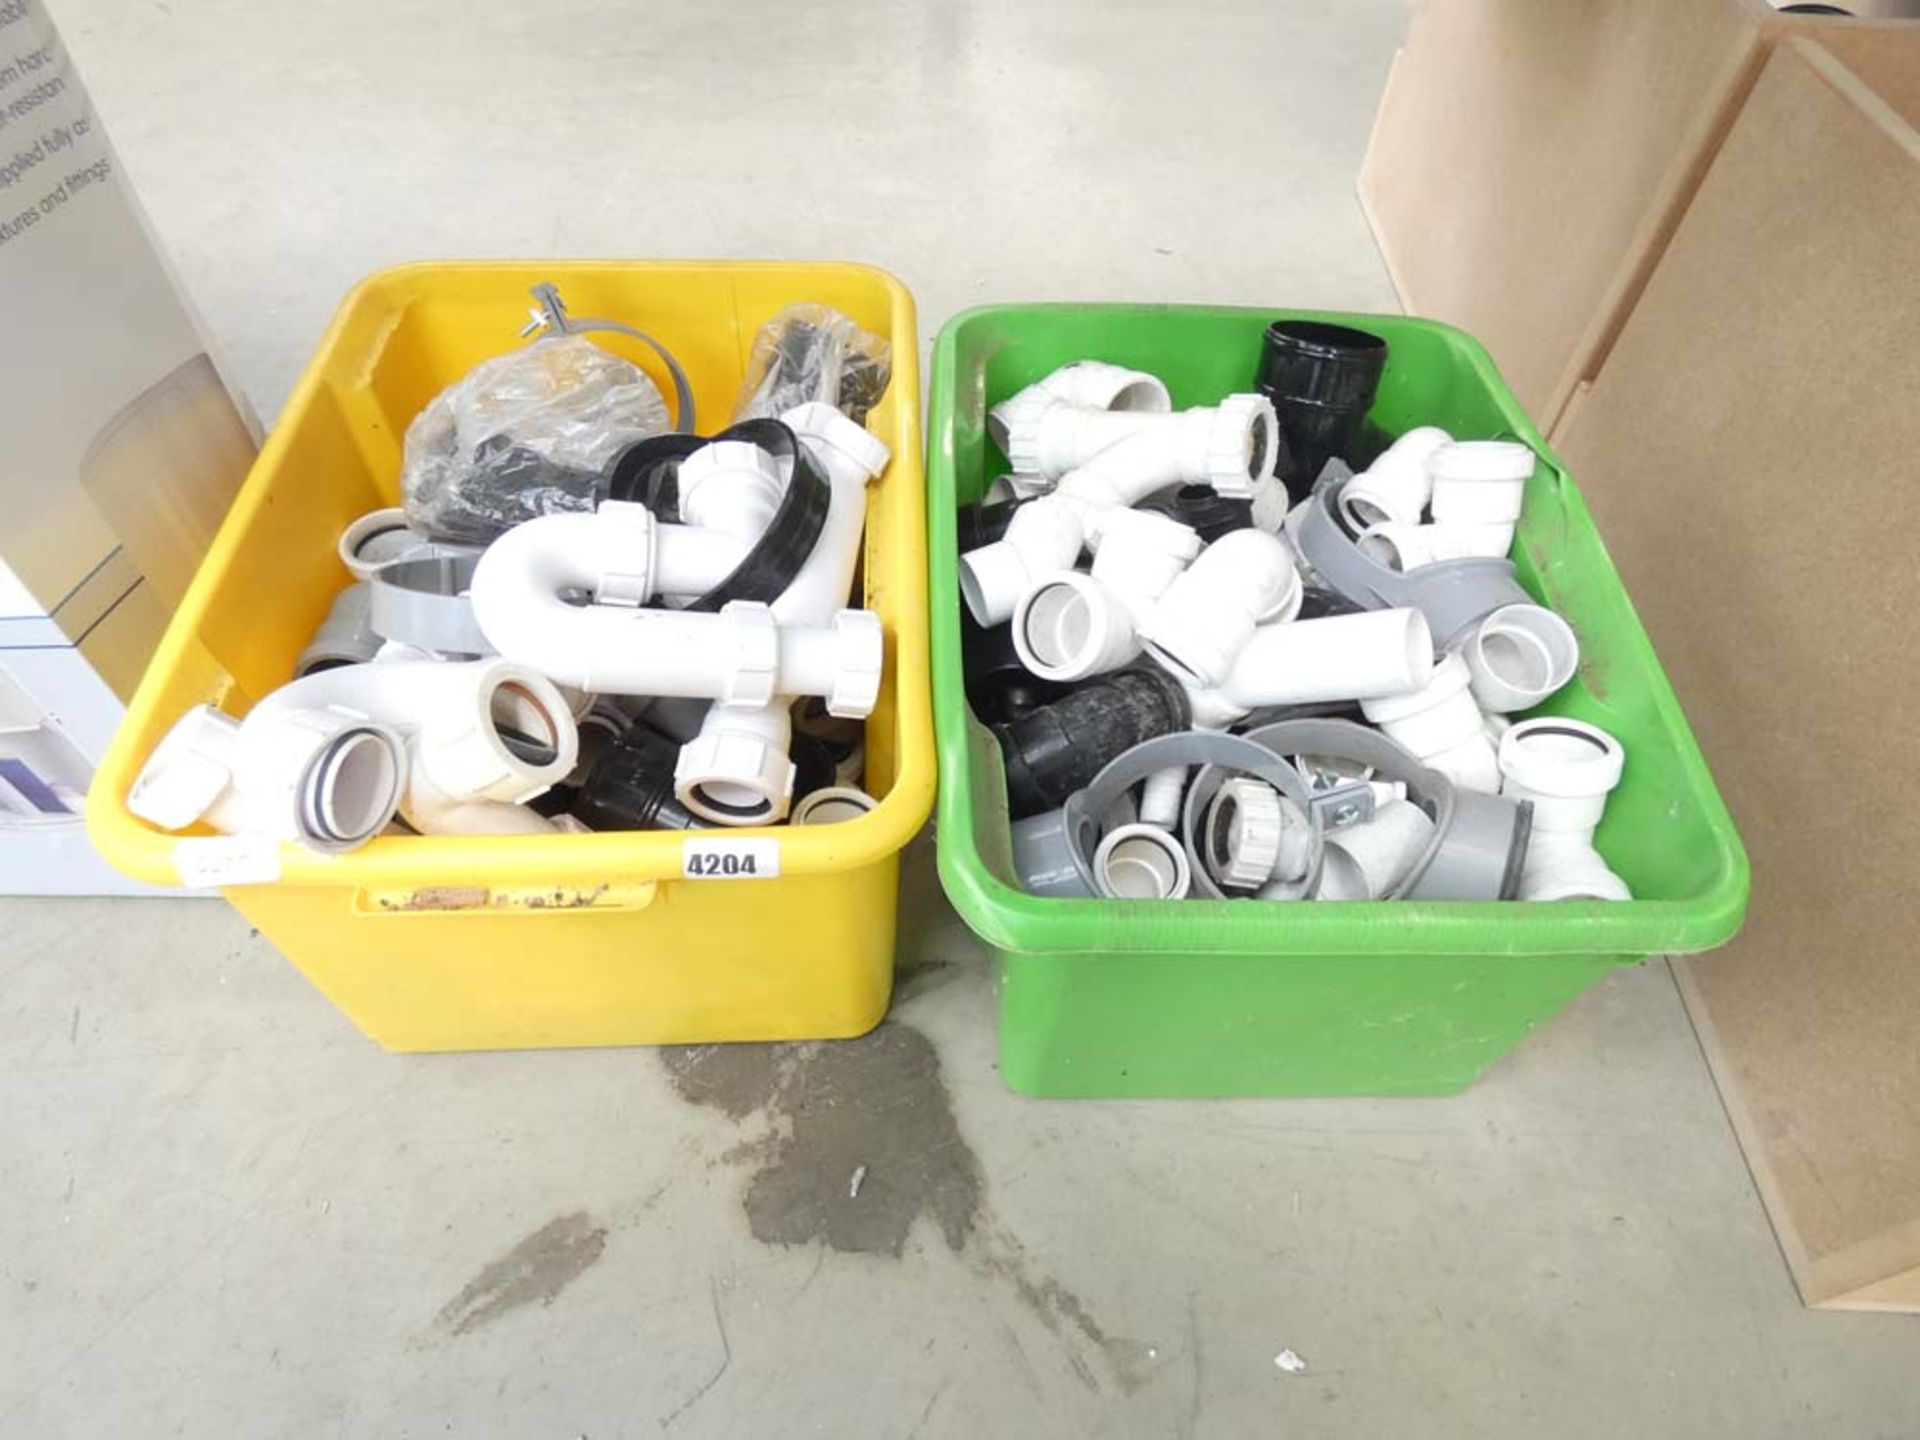 2 plastic boxes of plumbing fittings